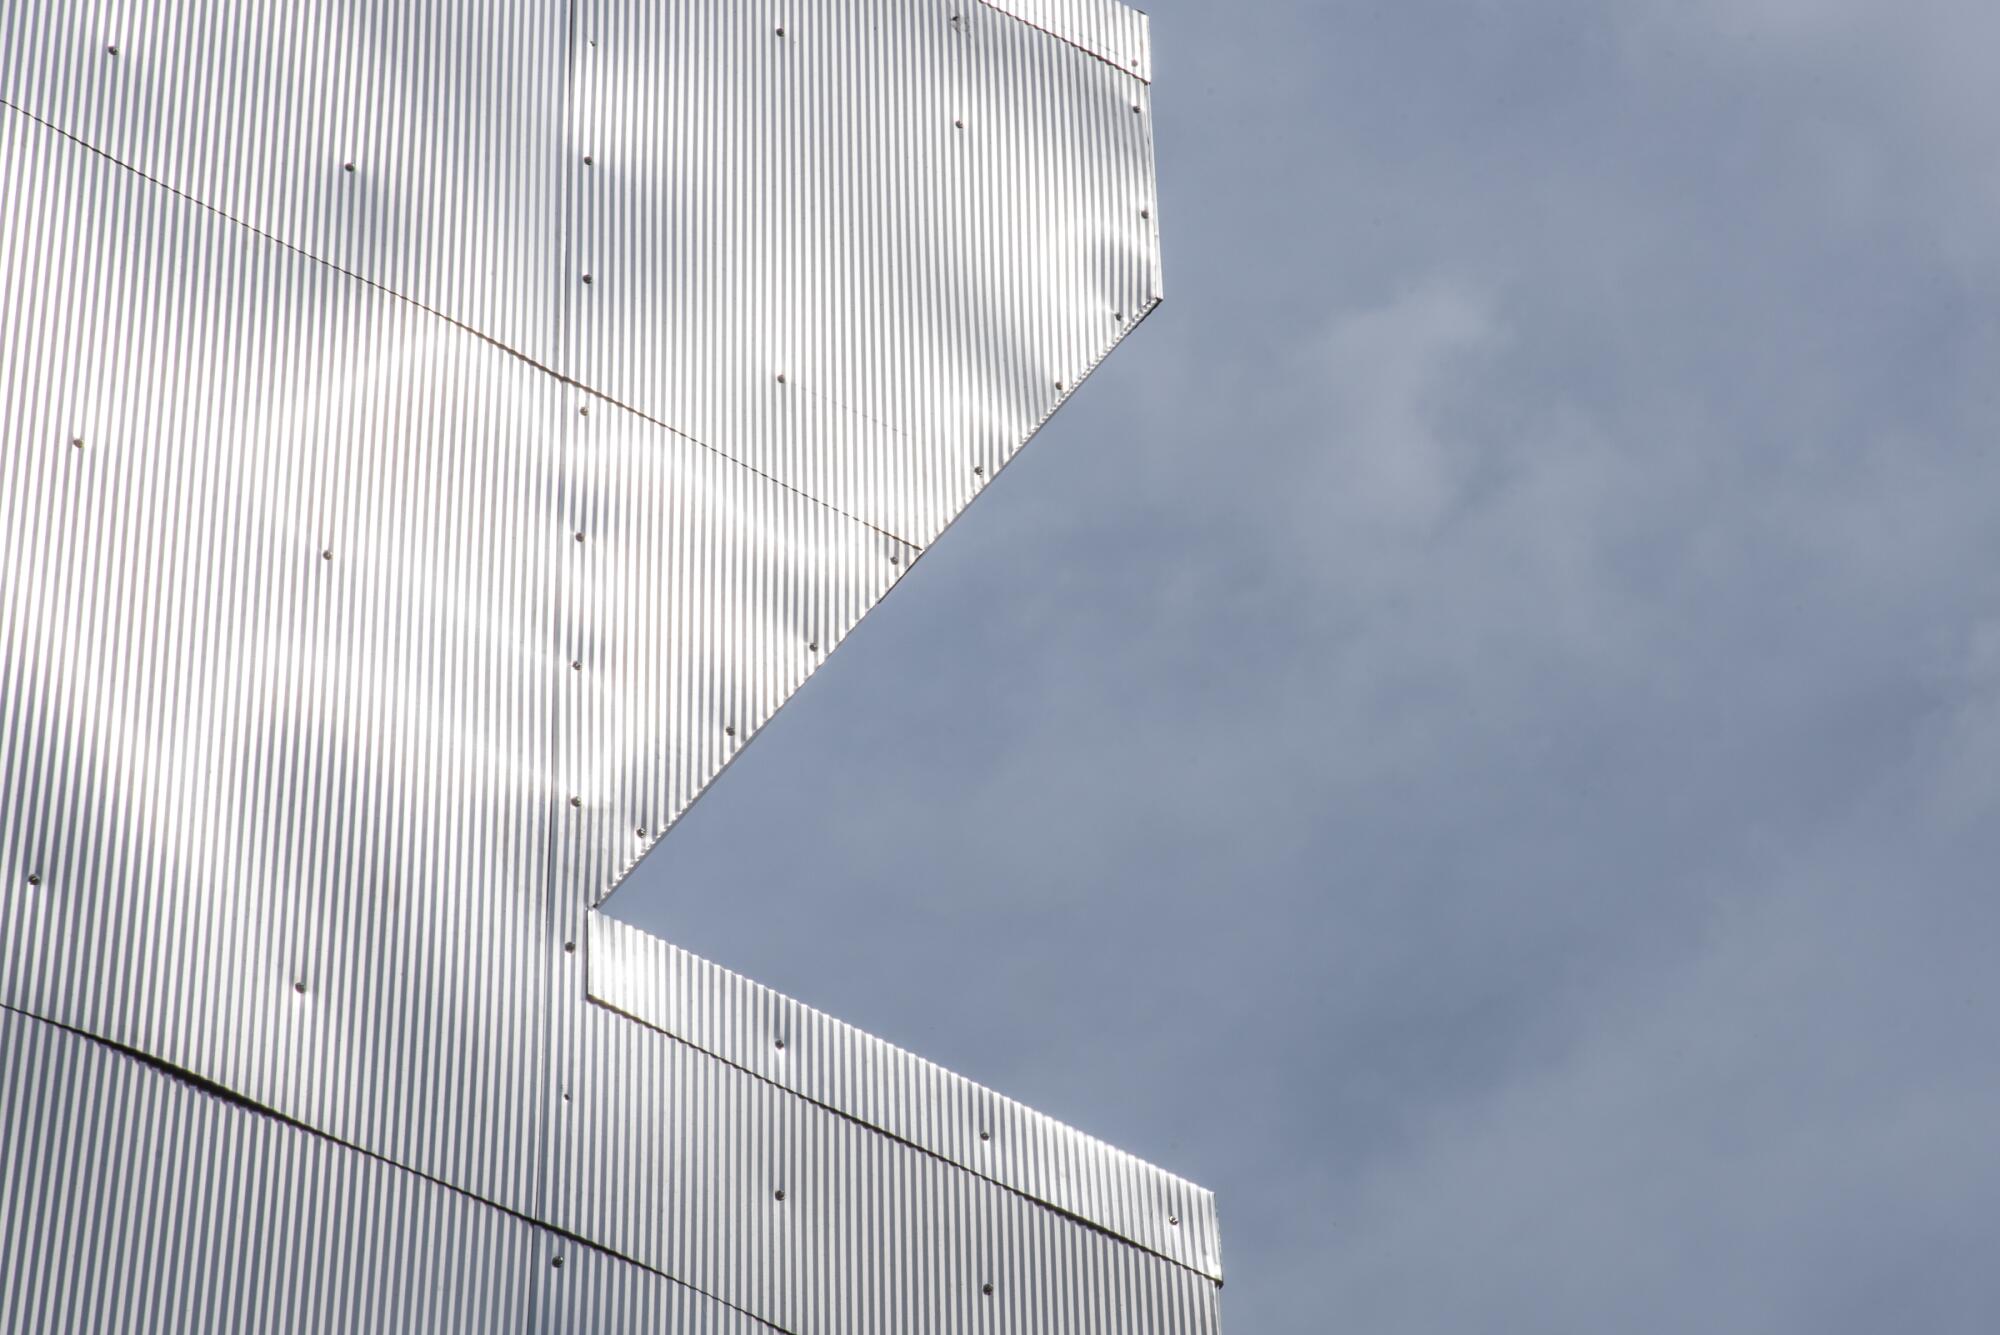 Details of the corrugated metal siding of the Aluminaire House against a blue sky.